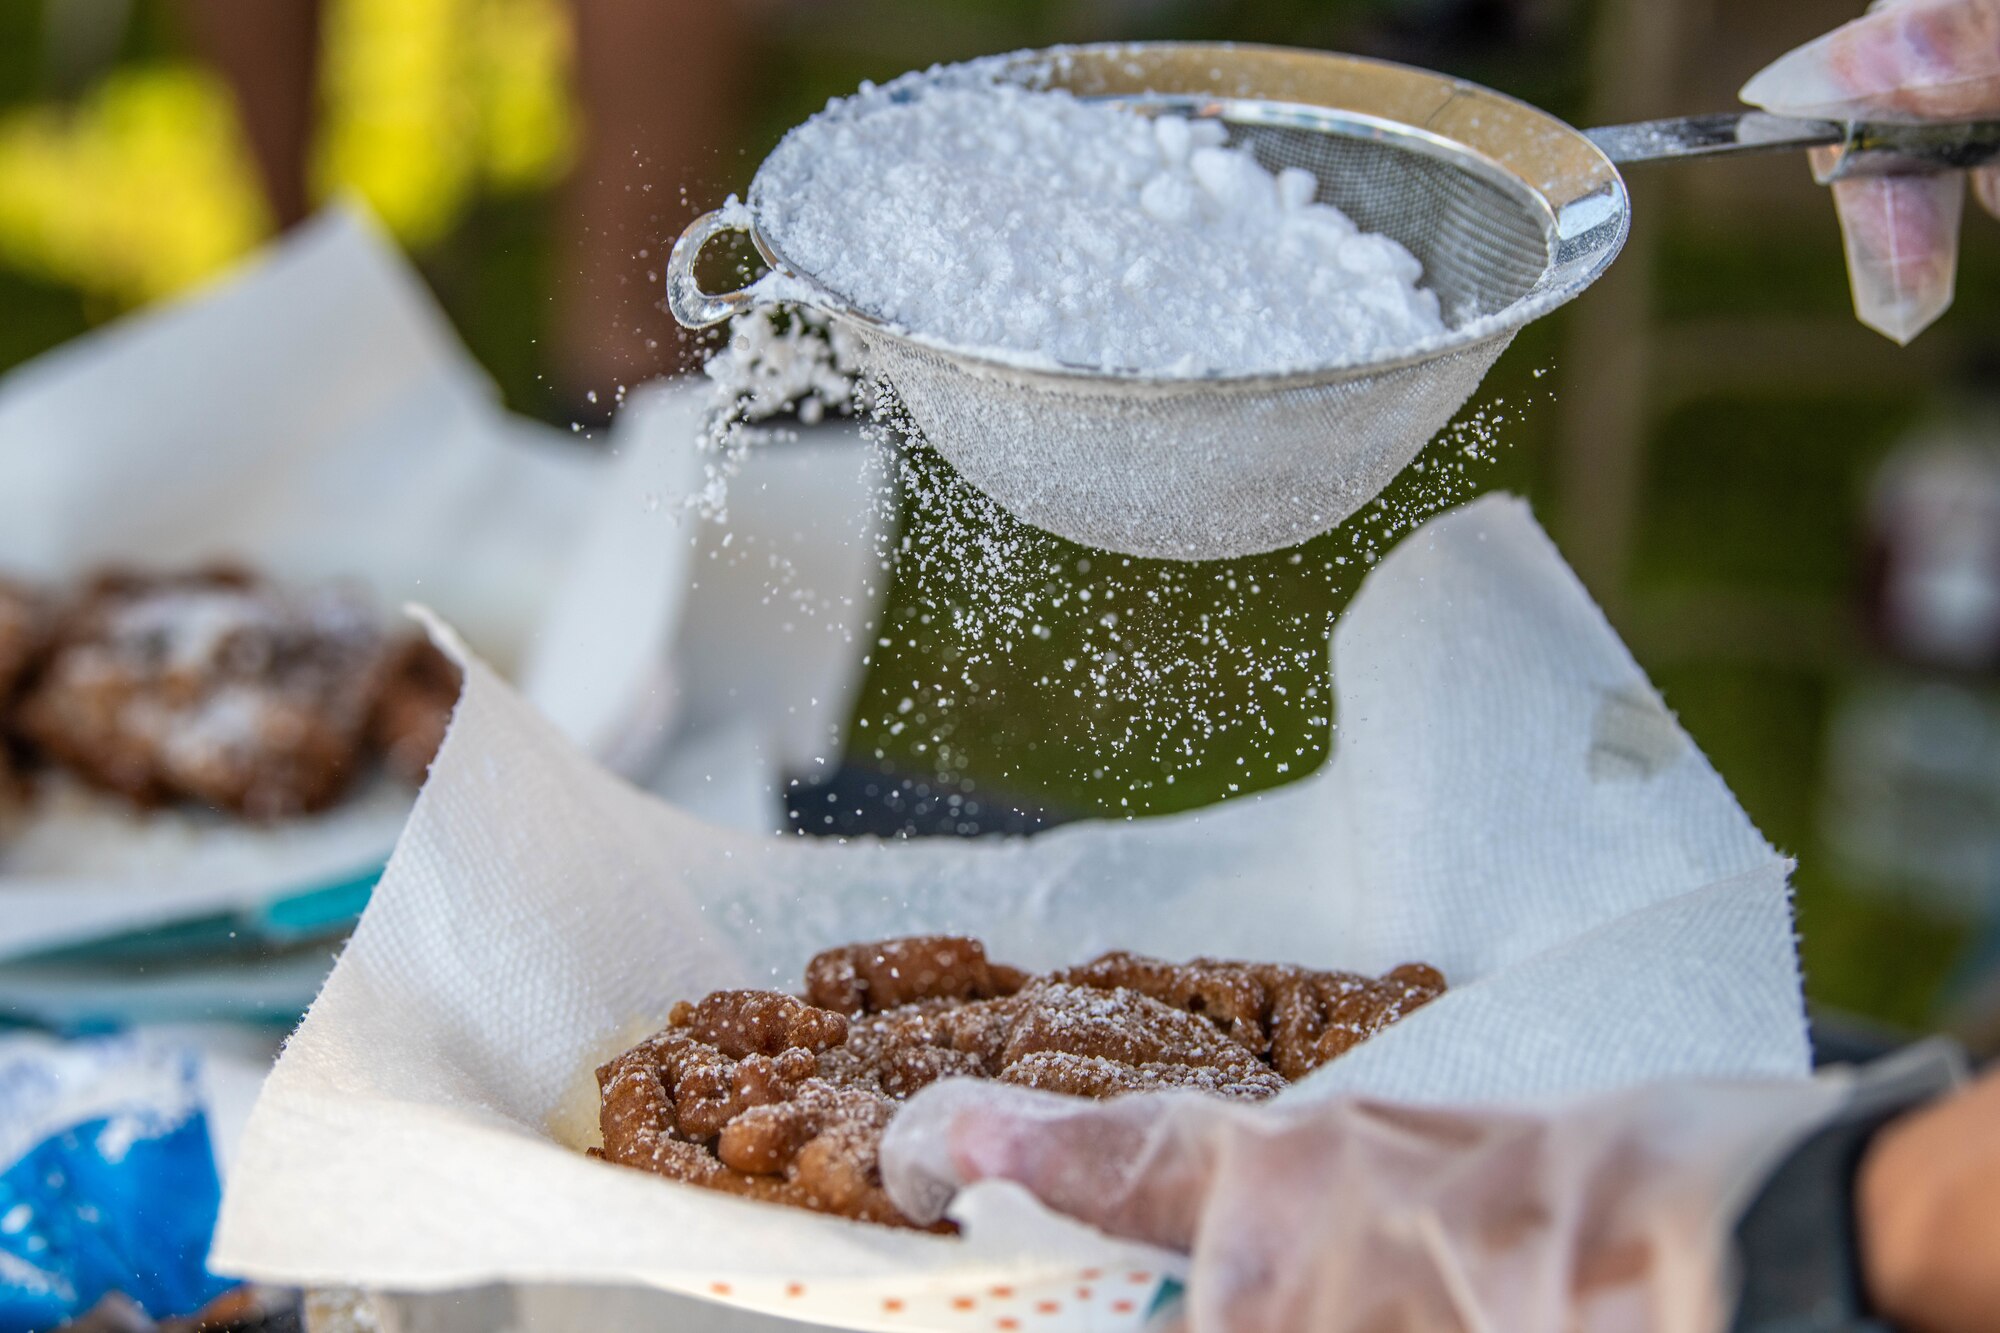 A food vendor sprinkles powdered sugar on top of a funnel cake